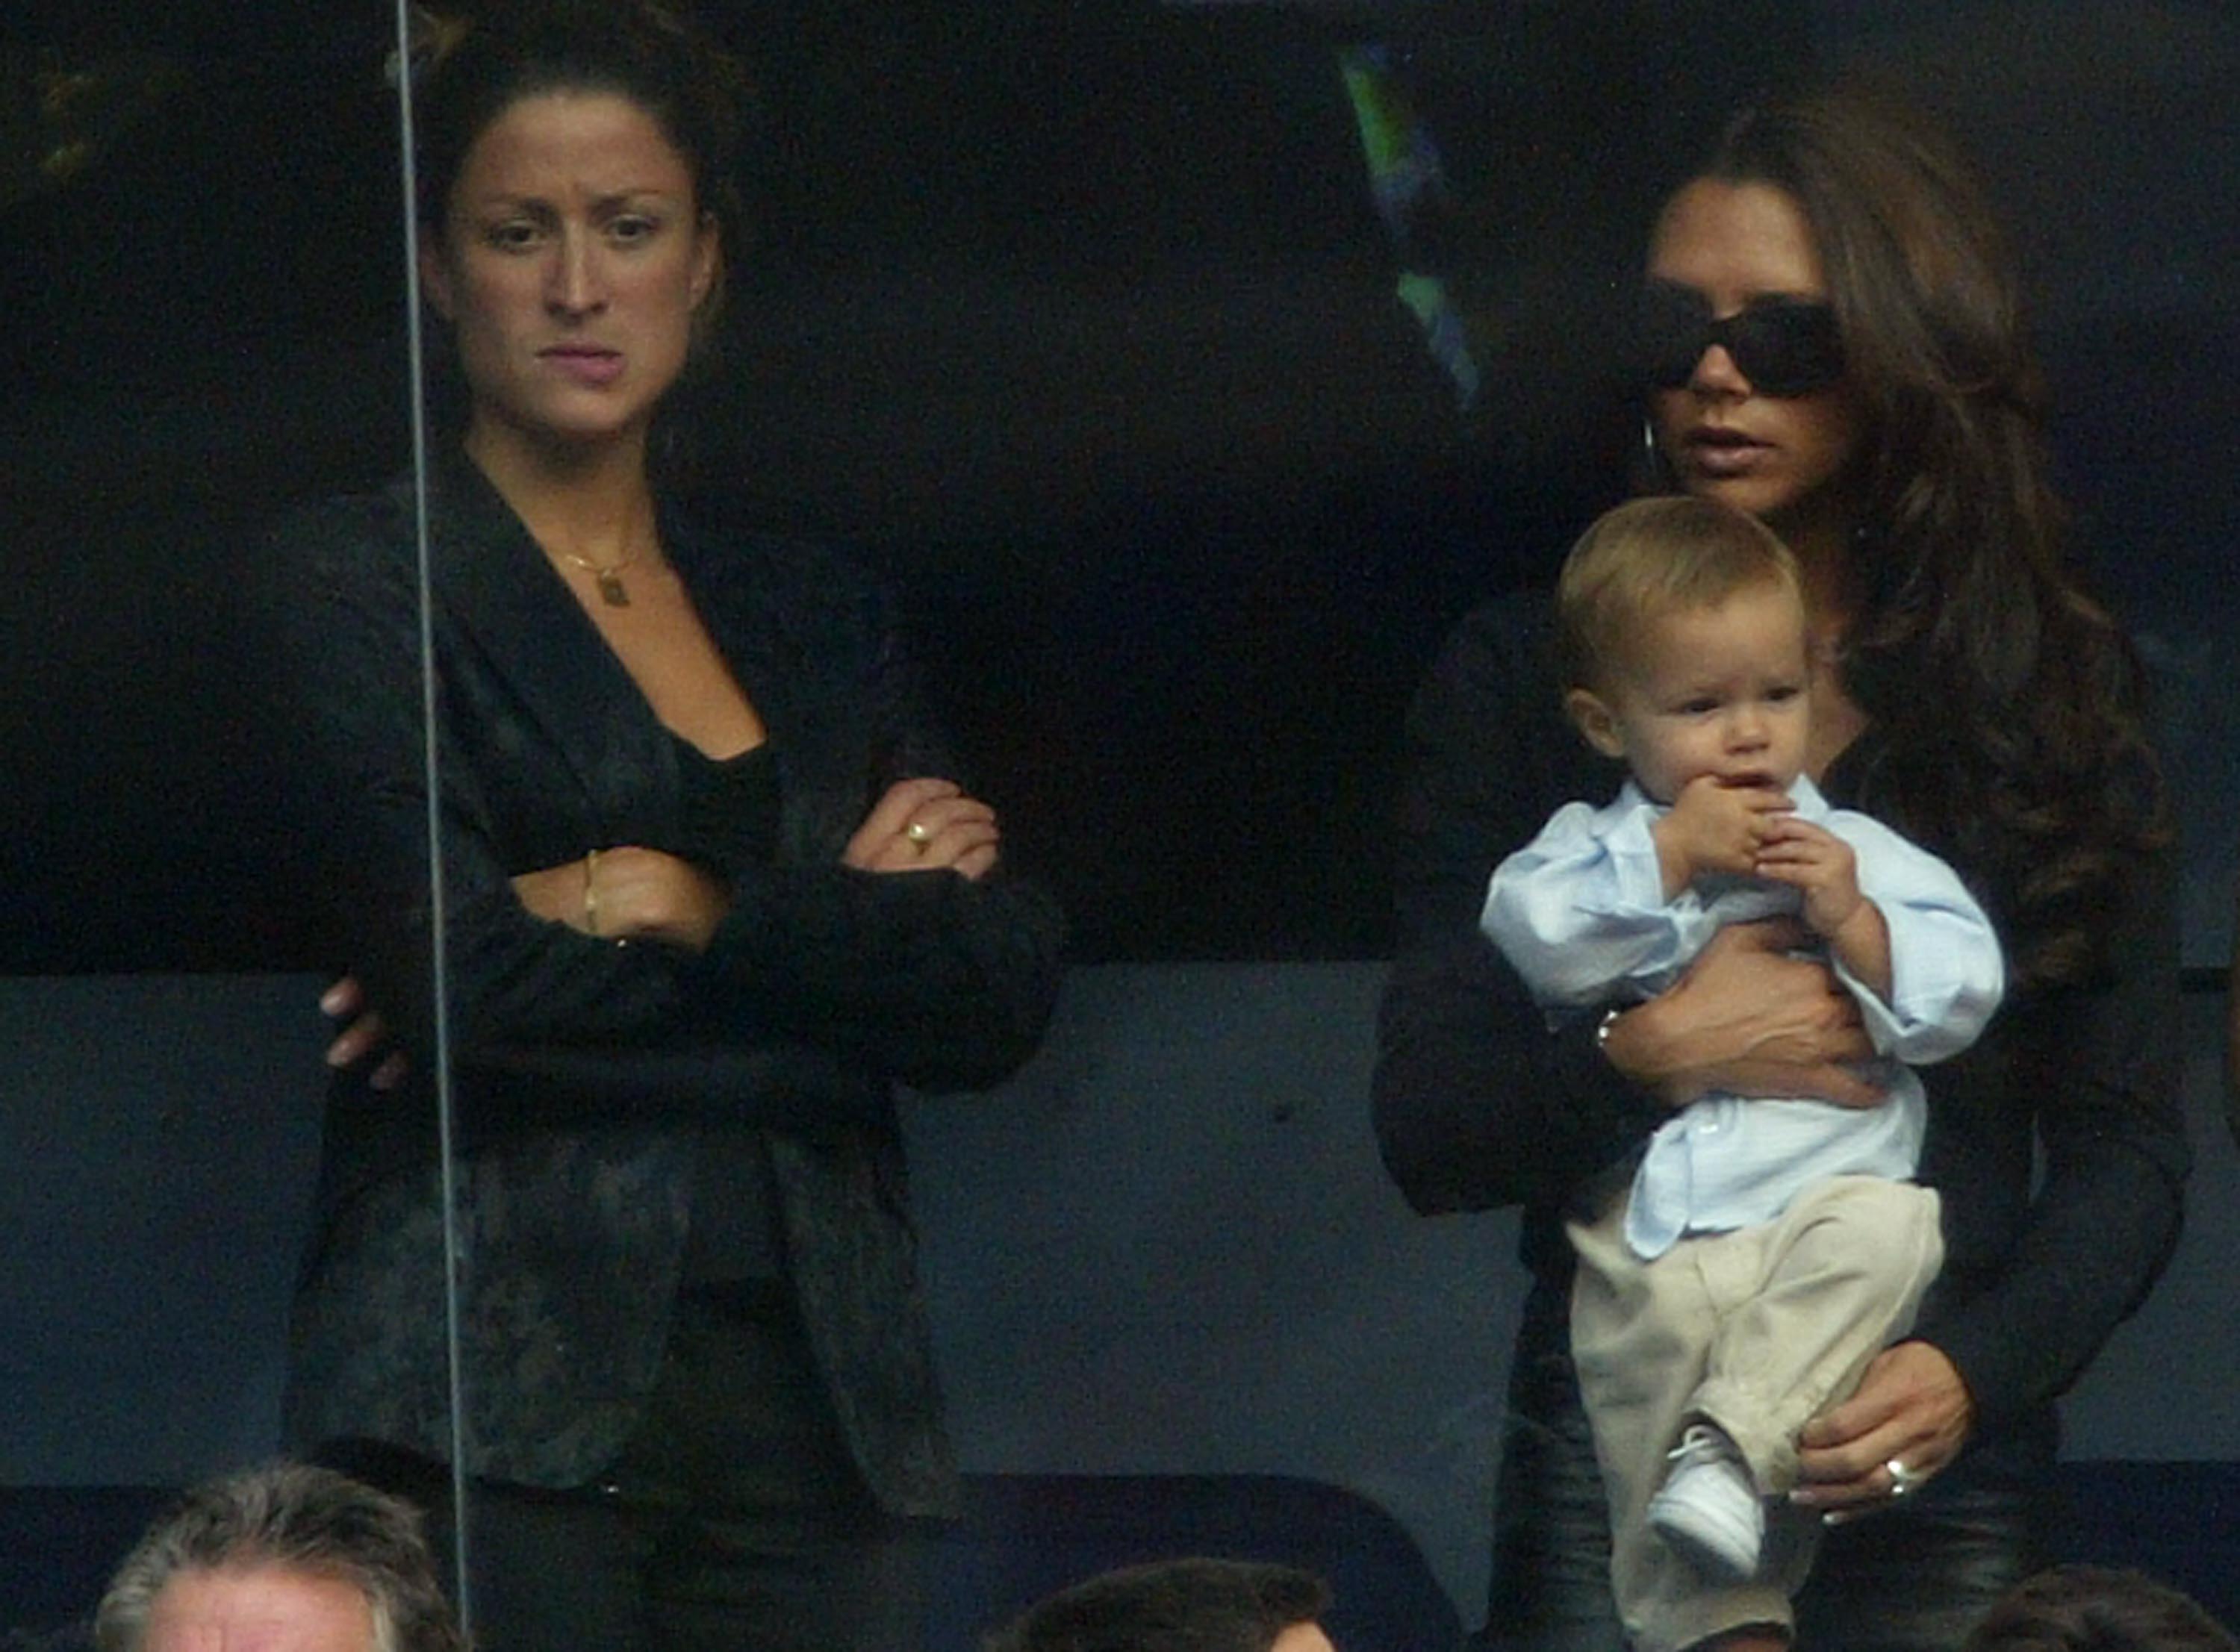 Rebecca Loos, alleged to have had an affair with David Beckham, stands next to Victoria Beckham while watching a Real Madrid soccer game.